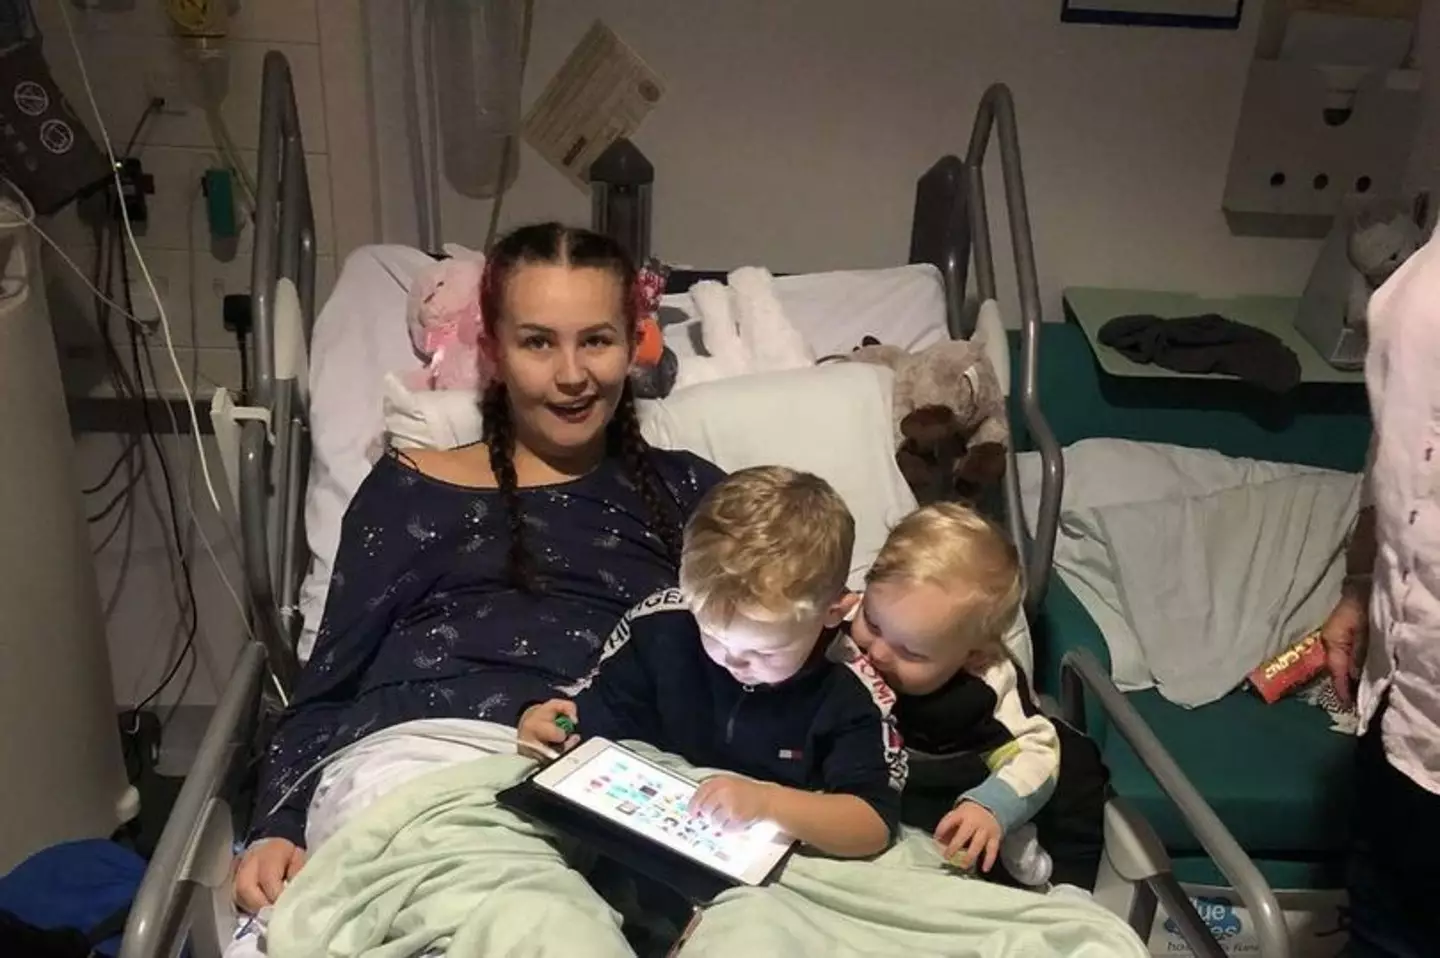 Casey remained in hospital for four days after her first stroke.